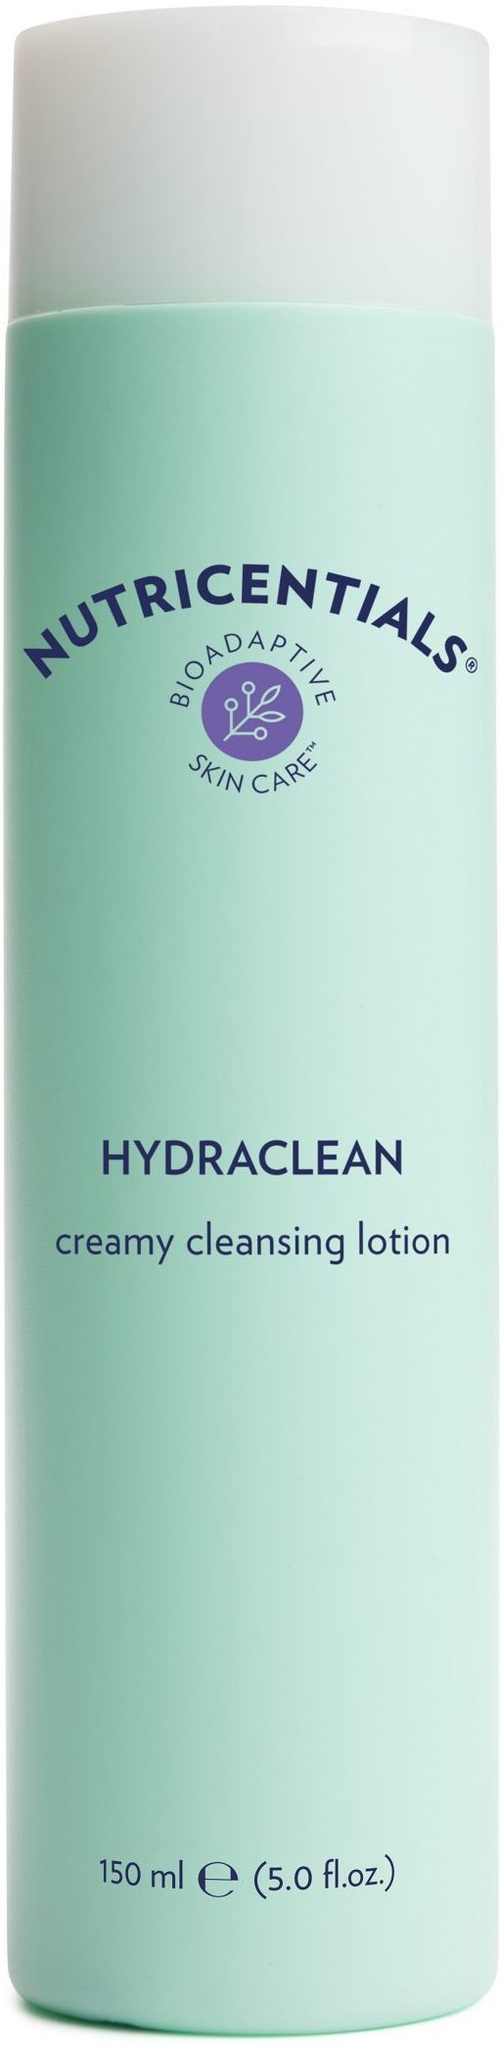 Nu Skin HydraClean Creamy Cleansing Lotion